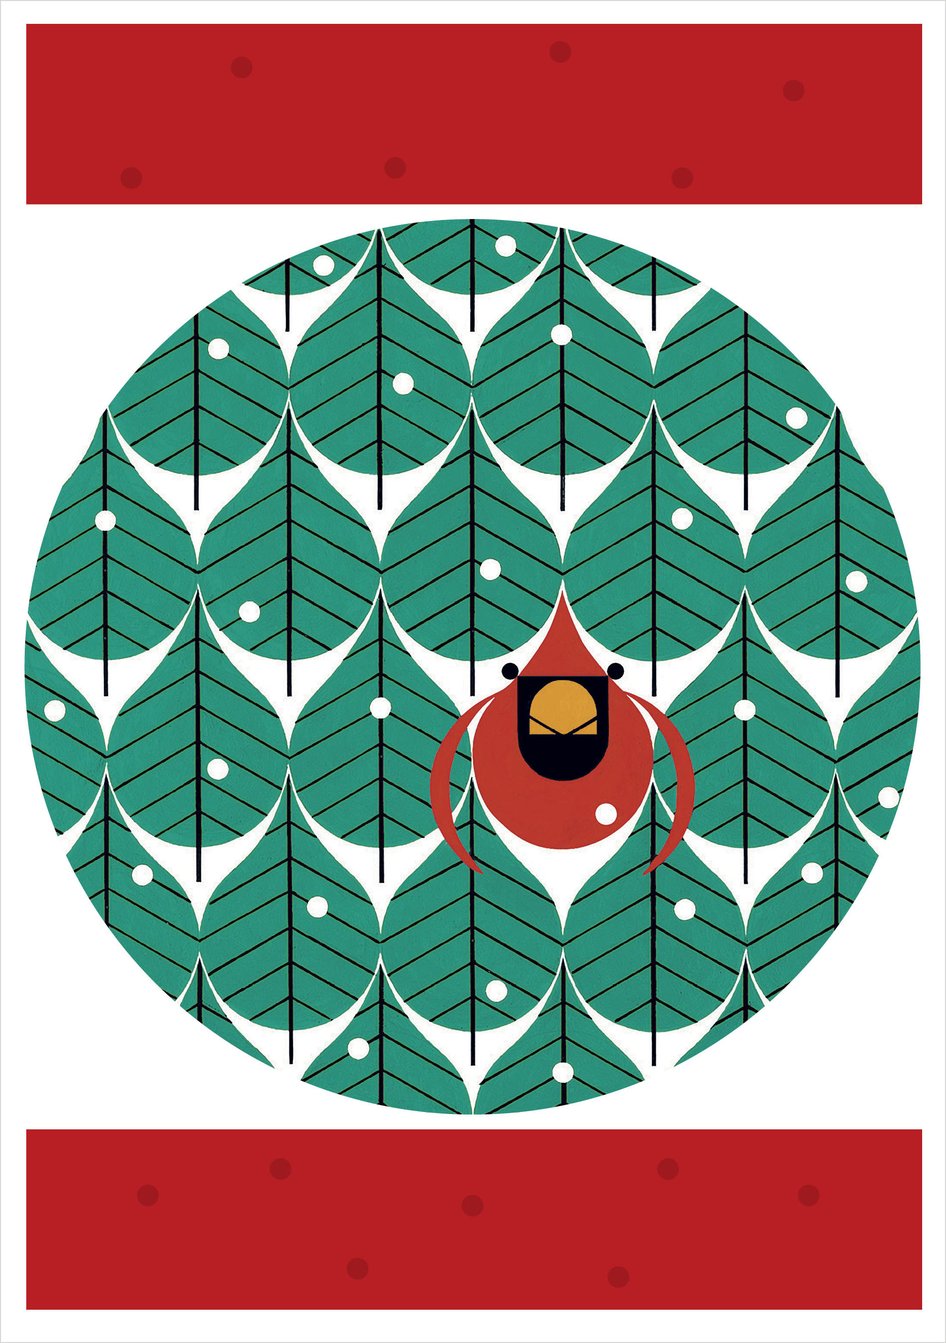 Charley Harper Cool Cardinals - A Boxed Holiday Card Assortment    